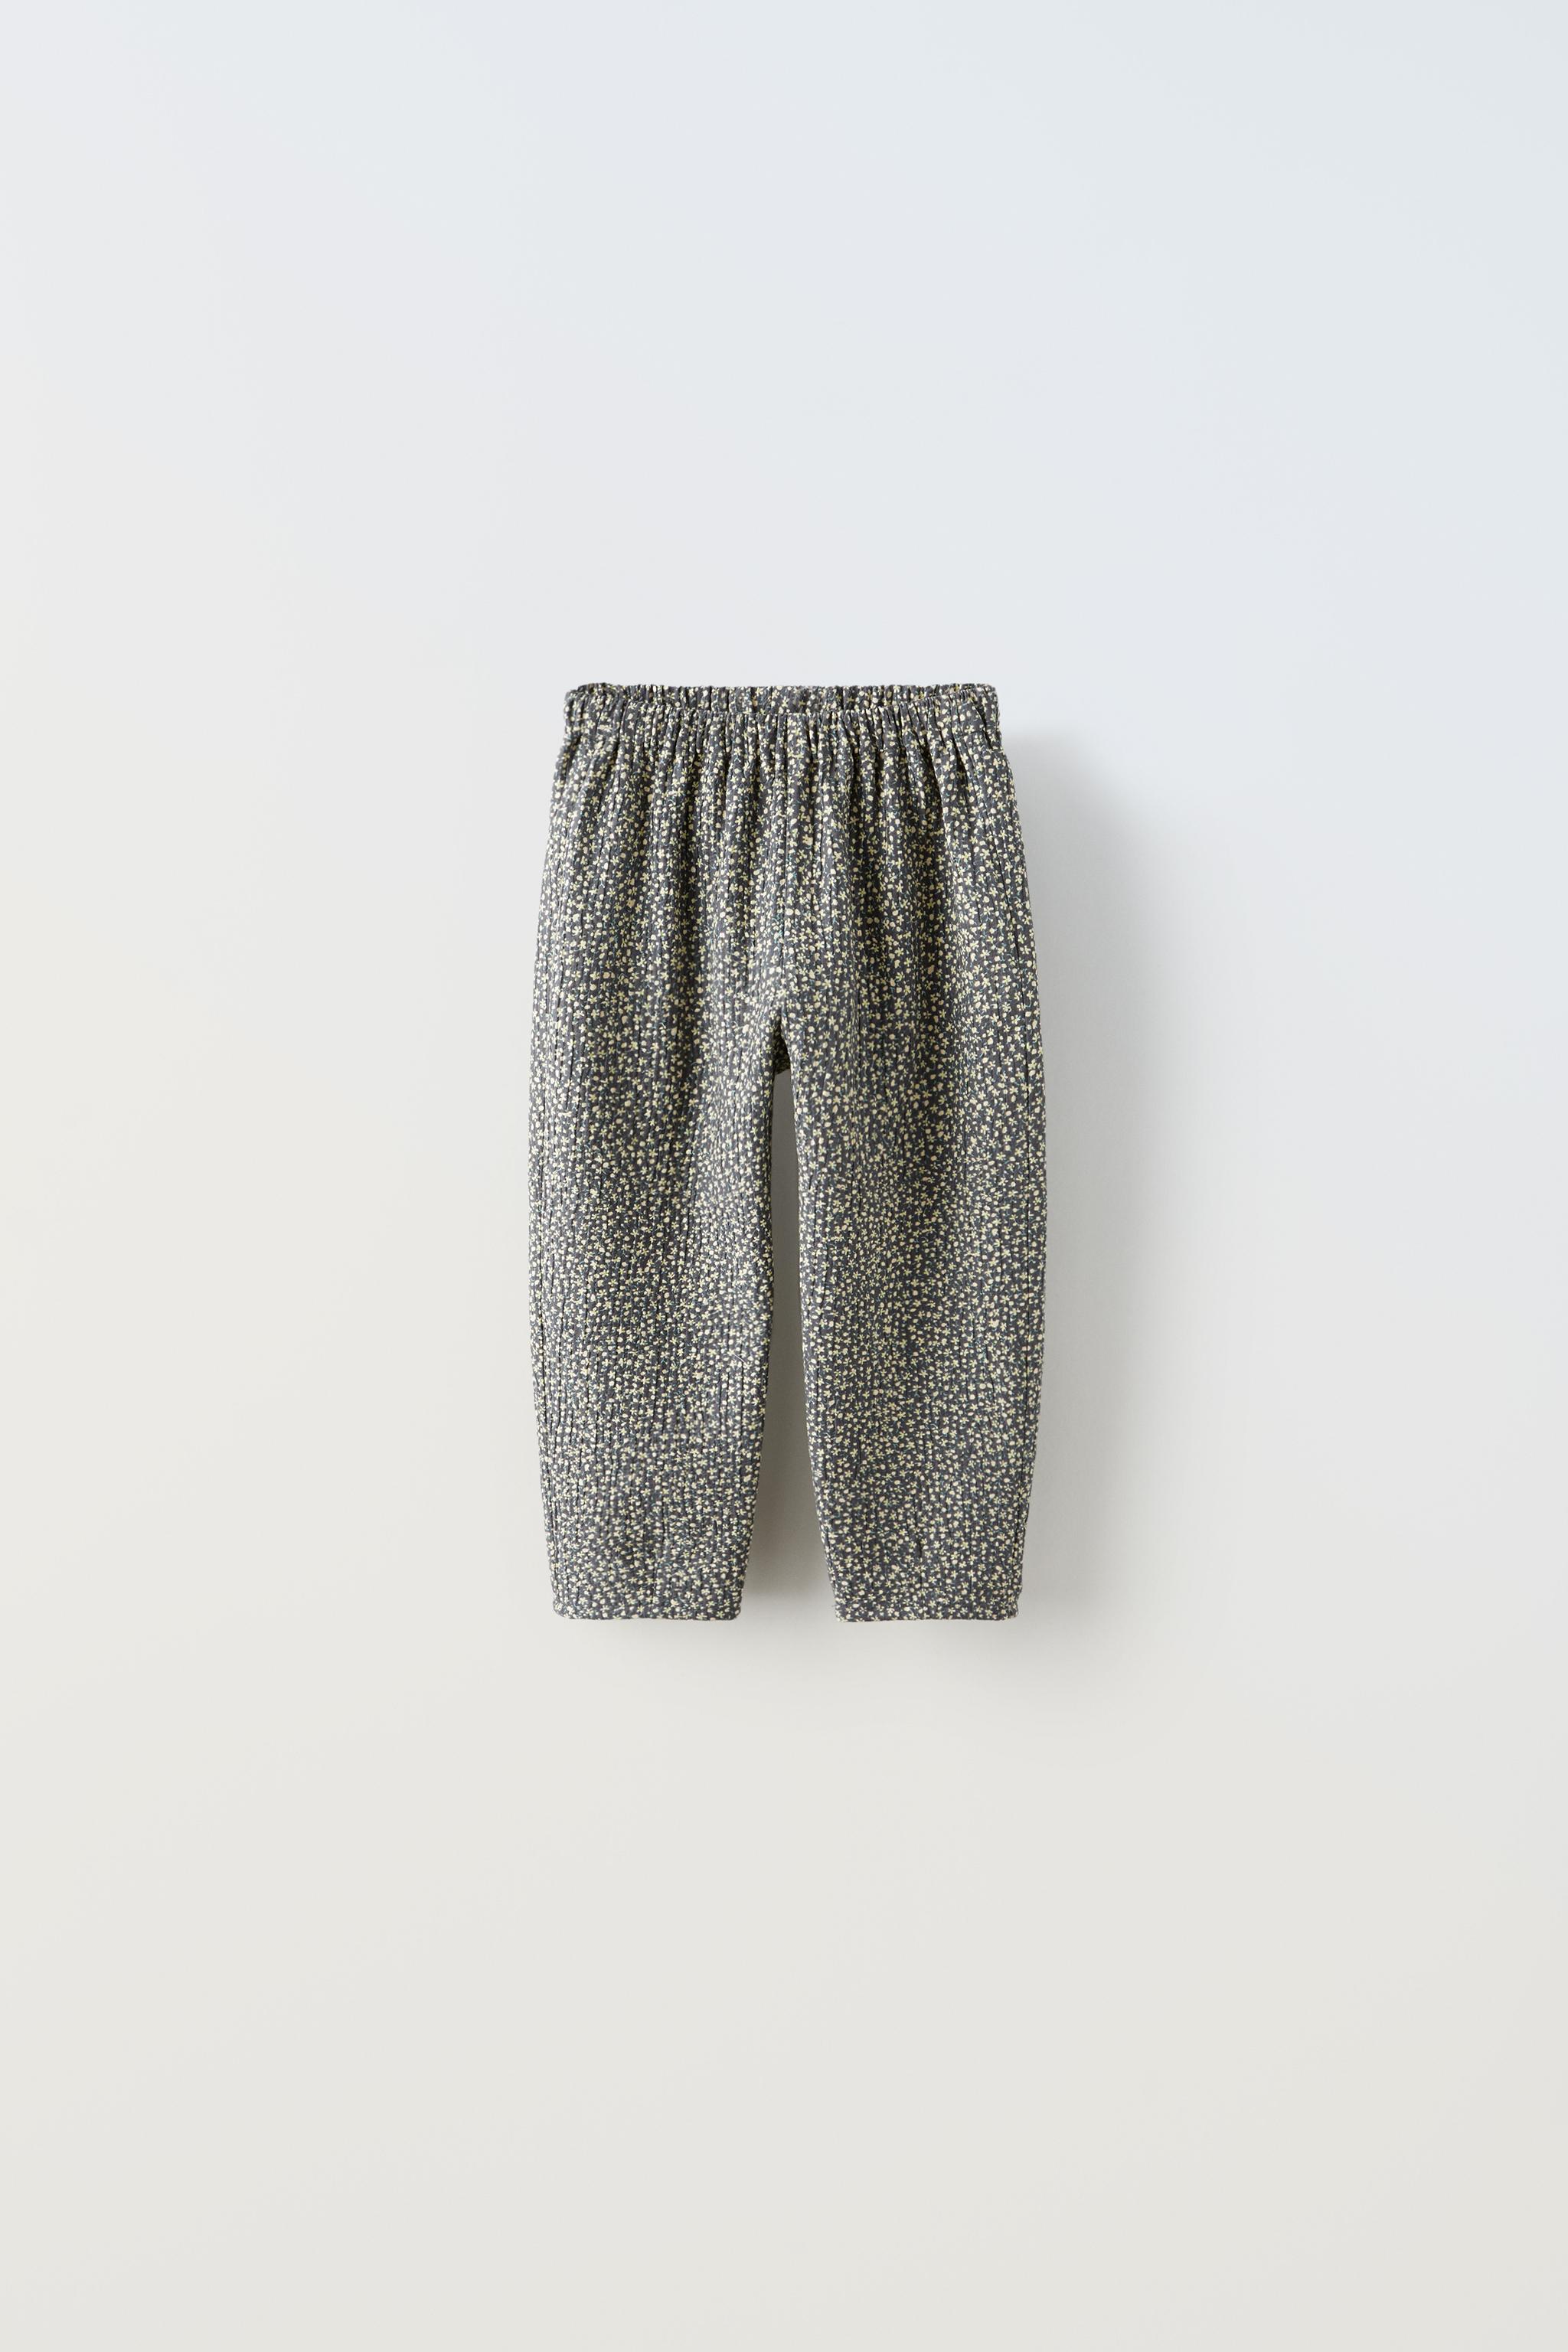 Fashion buy of the day: Zara printed trousers, Fashion